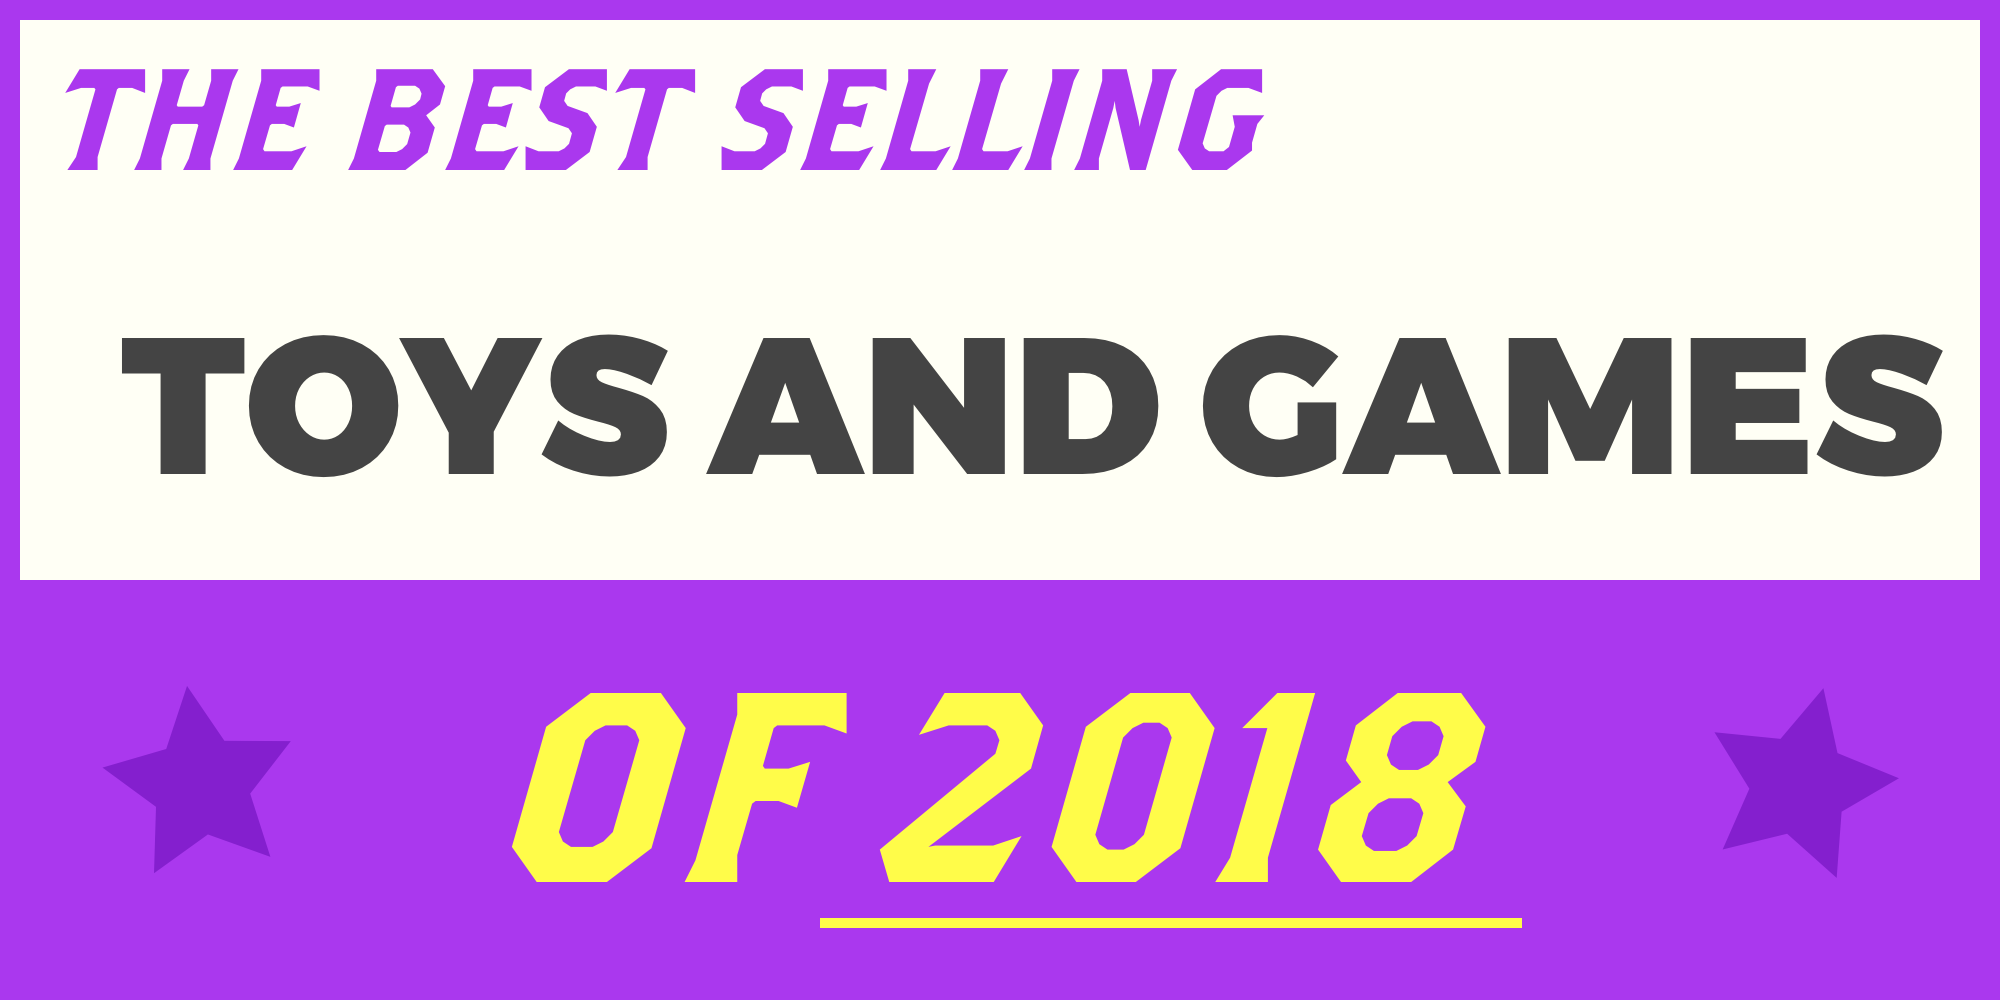 best selling toys for 2018